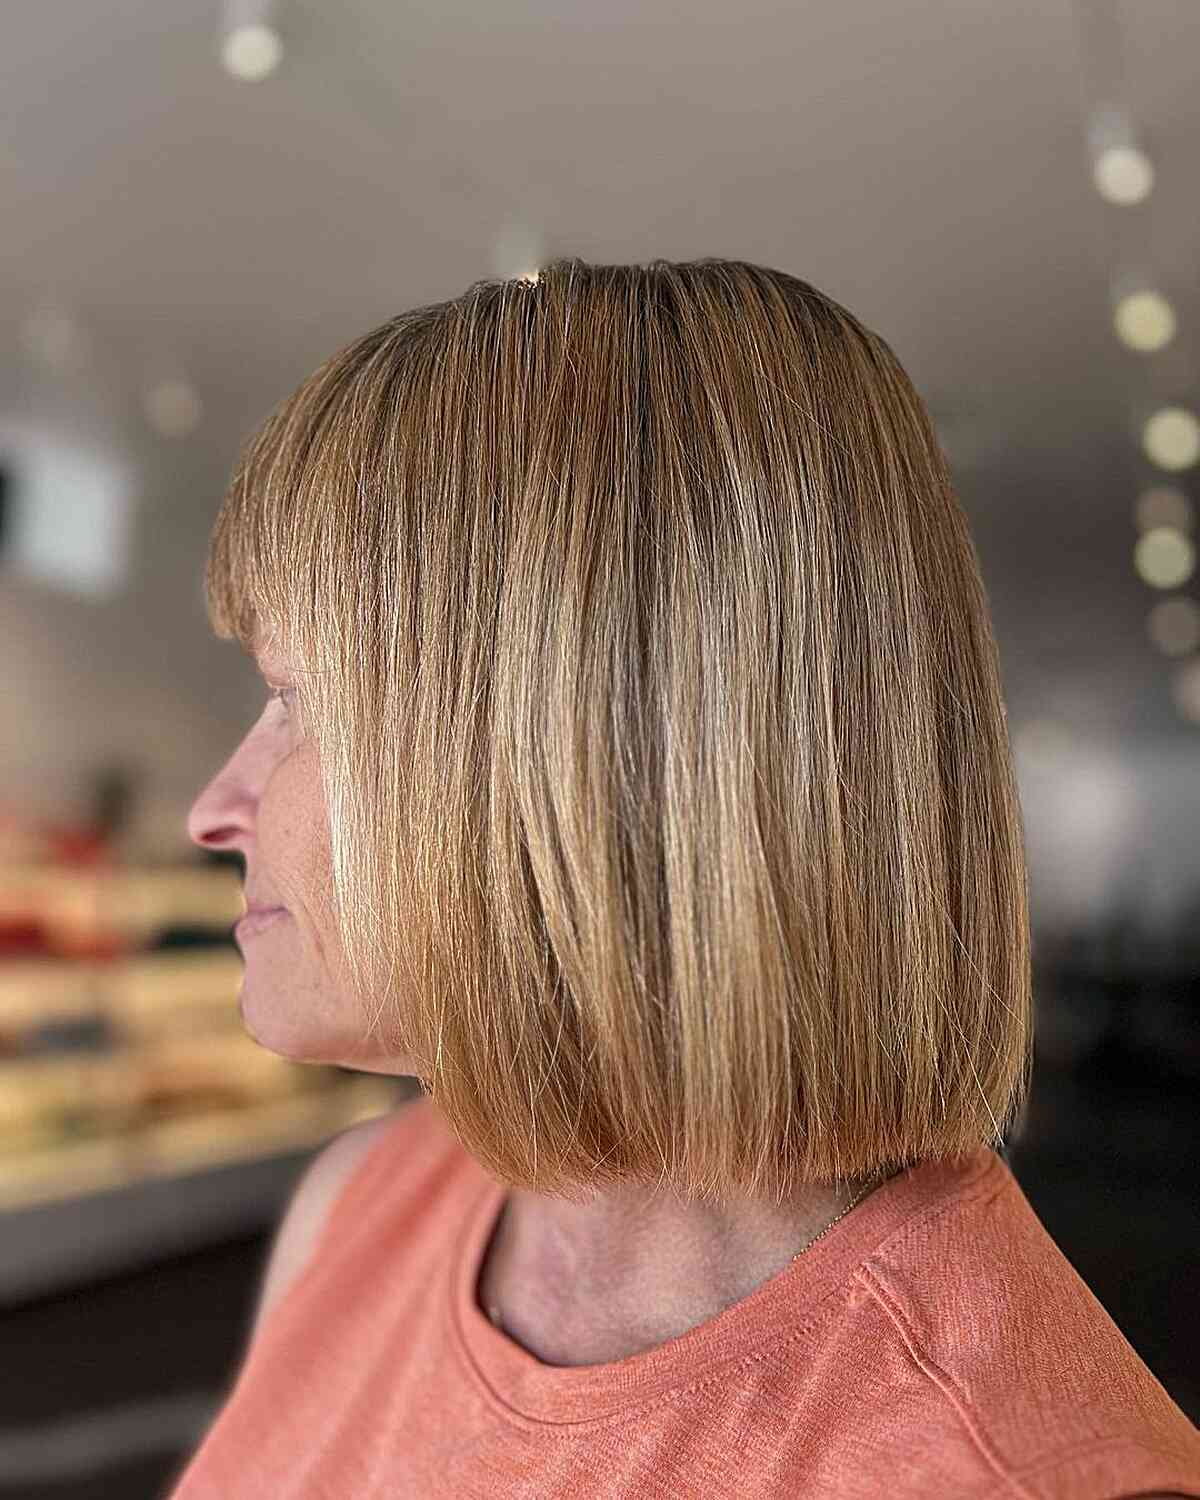 Neck-Length Blunt Bob and Bangs for Older Ladies Over 70